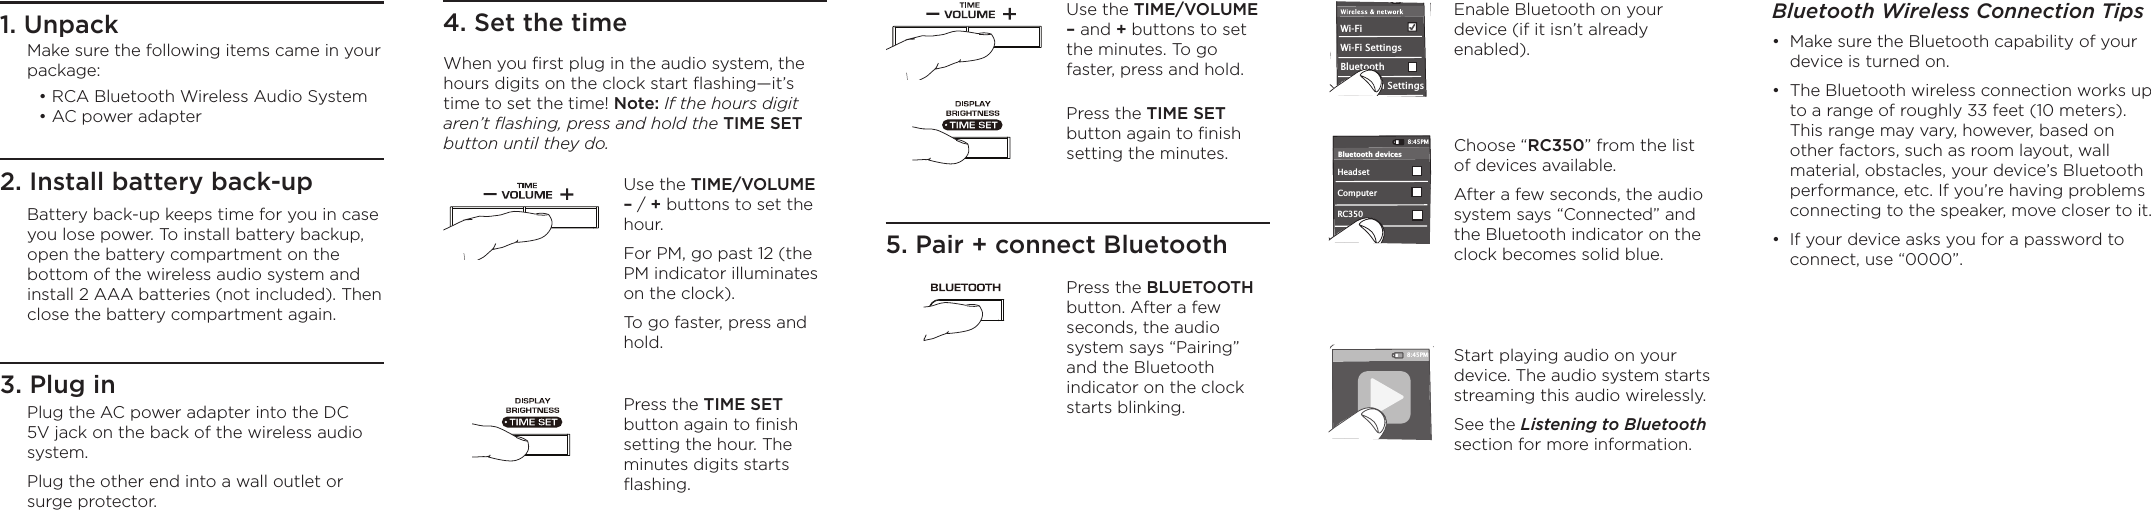 Enable Bluetooth on your device (if it isn’t already enabled).1. Unpack2. Install battery back-up4. Set the time5. Pair + connect BluetoothUse the TIME/VOLUME – and + buttons to set the minutes. To go faster, press and hold.Press the TIME SET button again to ﬁnish setting the minutes.3. Plug inWi-Fi BluetoothBluetooth SettingsVPN SettingsWi-Fi Settings8:45PMHeadset RC350Computer8:45PMBluetooth devices8:45PMBluetooth Wireless Connection Tips•  Make sure the Bluetooth capability of your device is turned on.•  The Bluetooth wireless connection works up to a range of roughly 33 feet (10 meters). This range may vary, however, based on other factors, such as room layout, wall material, obstacles, your device’s Bluetooth performance, etc. If you’re having problems connecting to the speaker, move closer to it. •  If your device asks you for a password to connect, use “0000”.When you ﬁrst plug in the audio system, the hours digits on the clock start ﬂashing—it’s time to set the time! Note: If the hours digit aren’t ﬂashing, press and hold the TIME SET button until they do.Use the TIME/VOLUME – / + buttons to set the hour. For PM, go past 12 (the PM indicator illuminates on the clock). To go faster, press and hold.Press the BLUETOOTH button. After a few seconds, the audio system says “Pairing” and the Bluetooth indicator on the clock starts blinking.  Choose “RC350” from the list of devices available.After a few seconds, the audio system says “Connected” and the Bluetooth indicator on the clock becomes solid blue.Make sure the following items came in your package:• RCA Bluetooth Wireless Audio System • AC power adapterBattery back-up keeps time for you in case you lose power. To install battery backup, open the battery compartment on the bottom of the wireless audio system and install 2 AAA batteries (not included). Then close the battery compartment again.Plug the AC power adapter into the DC 5V jack on the back of the wireless audio system. Plug the other end into a wall outlet or surge protector.Press the TIME SET button again to ﬁnish setting the hour. The minutes digits starts ﬂashing.Start playing audio on your device. The audio system starts streaming this audio wirelessly.See the Listening to Bluetooth section for more information.